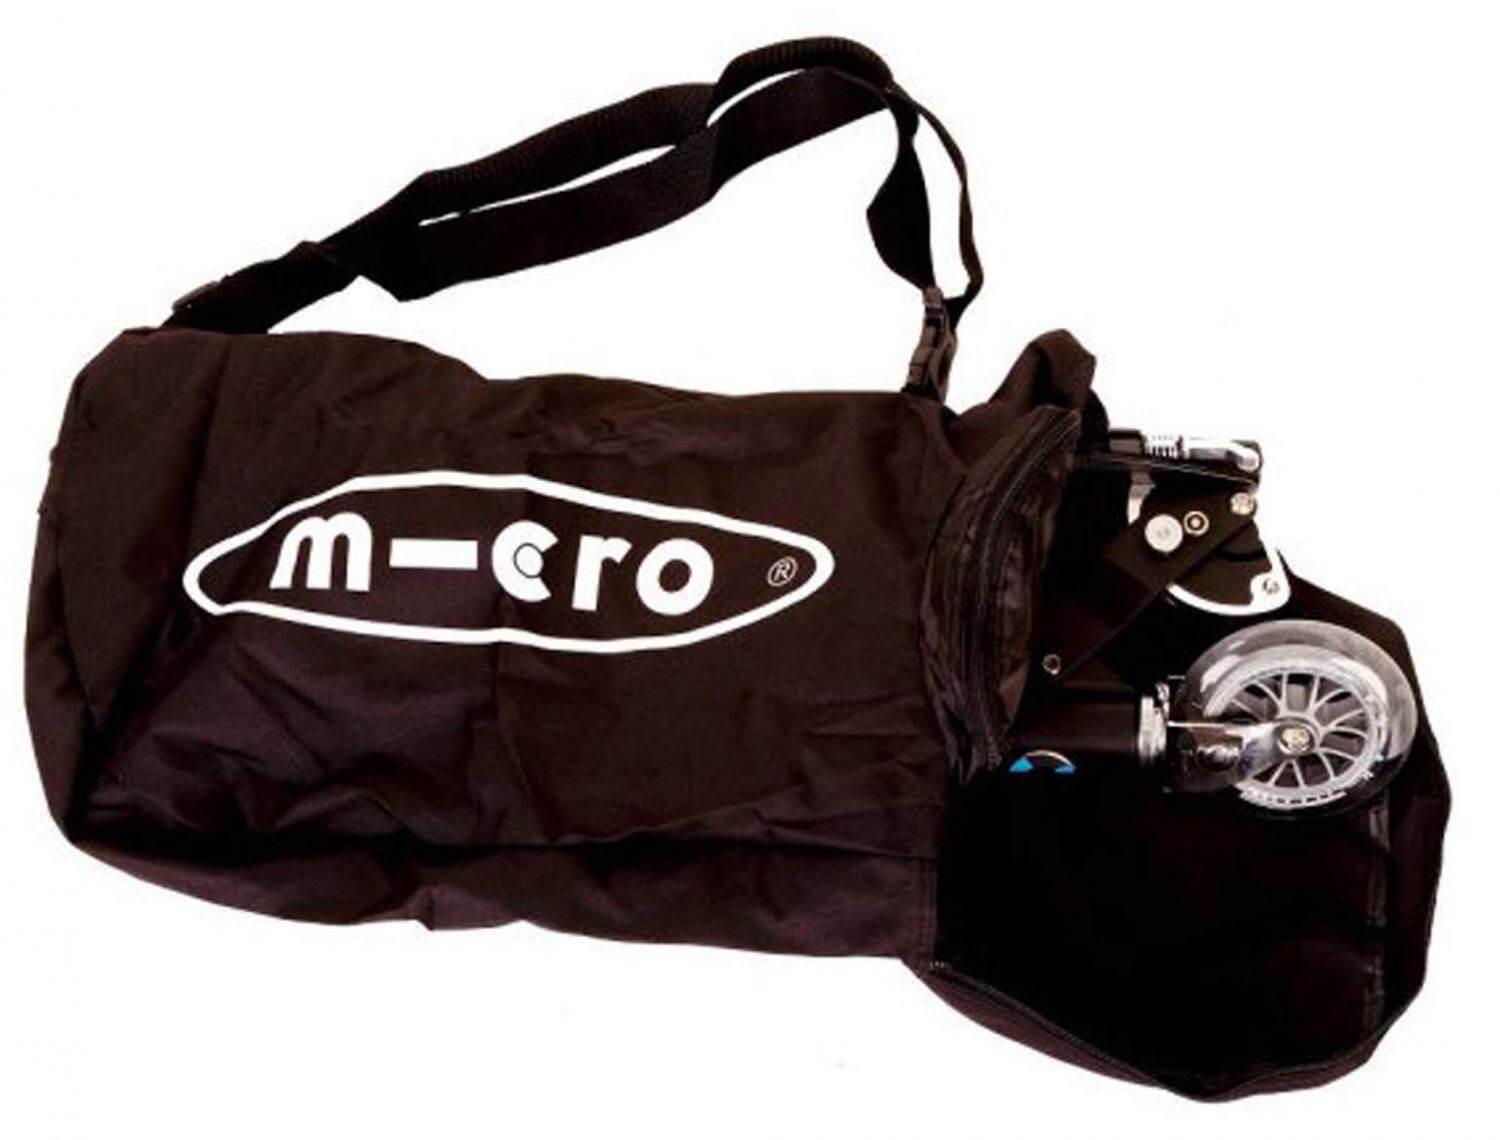 Micro Scootertasche Bag in Bag